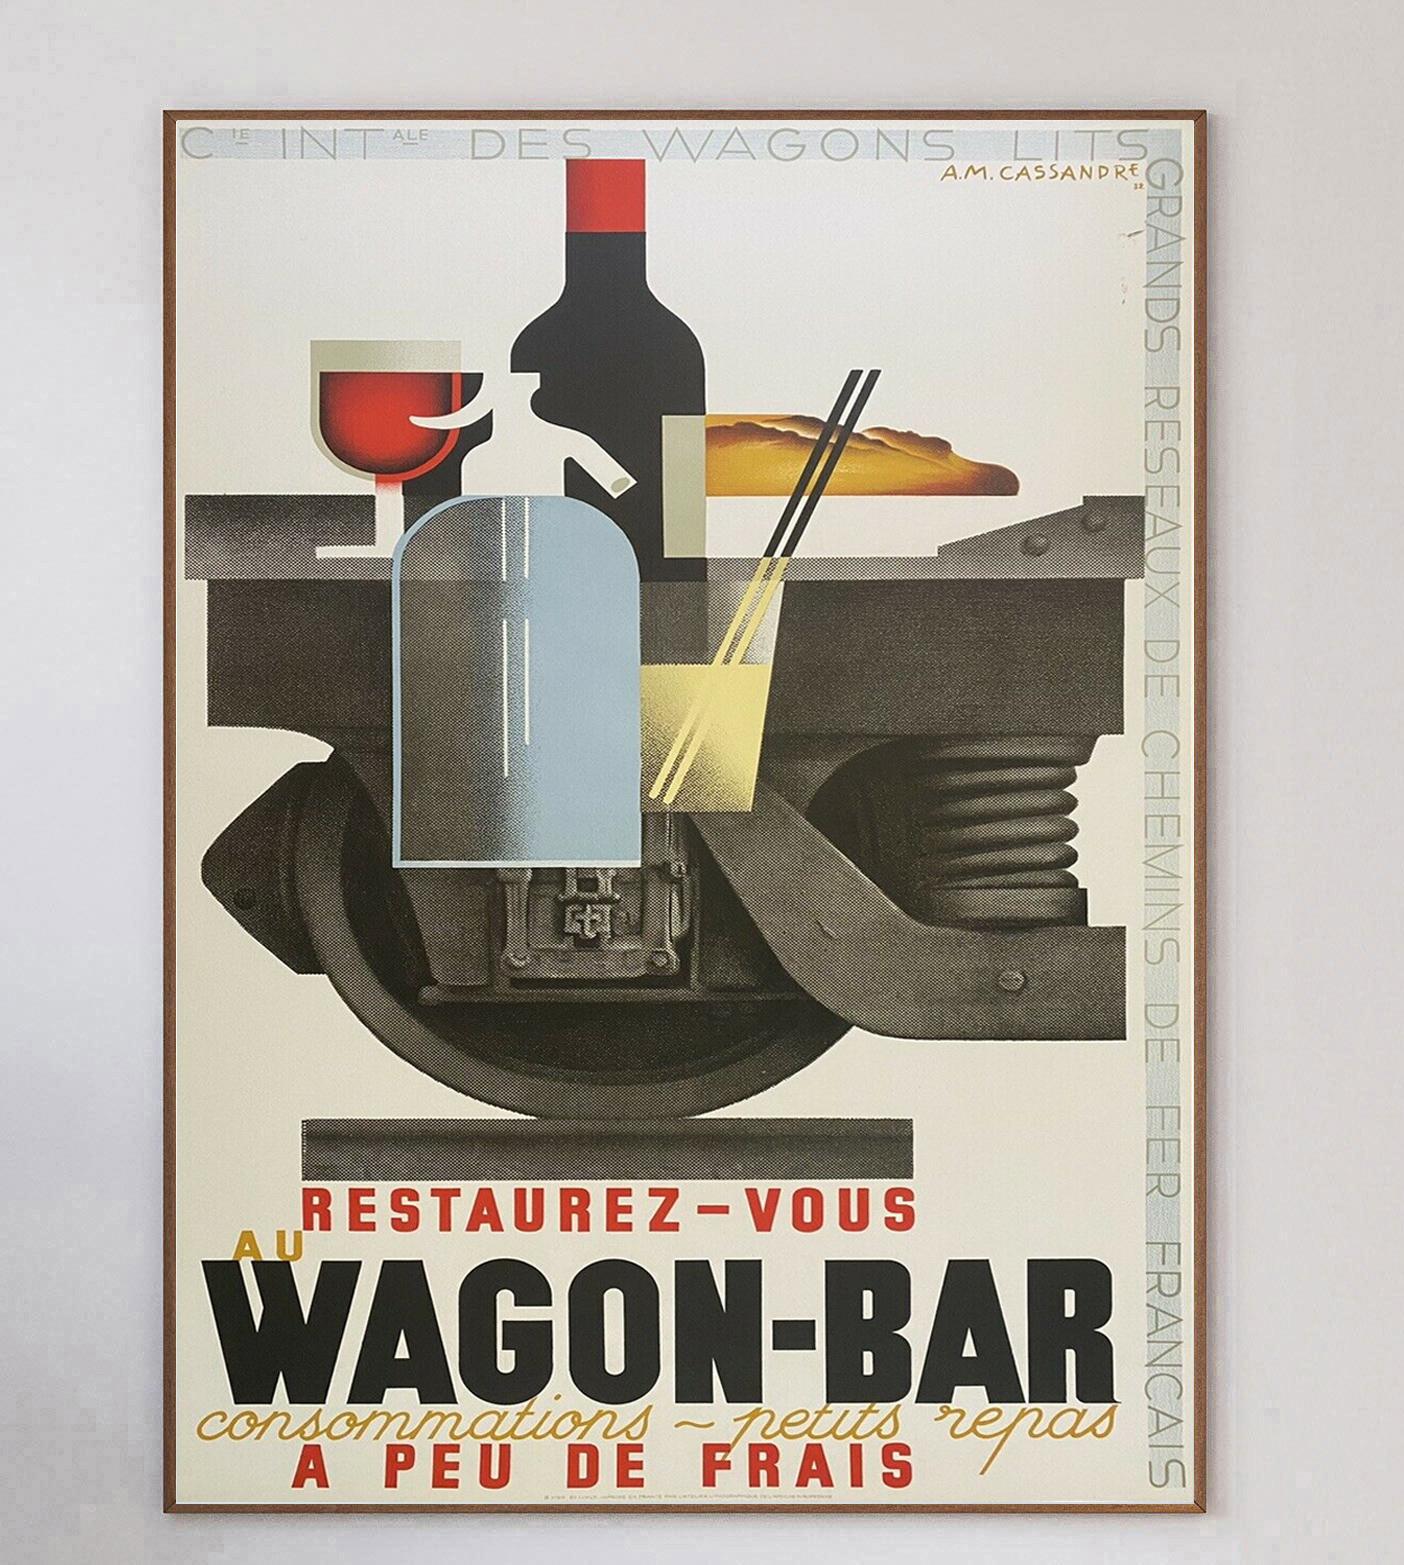 Beautiful art deco and modernist design by the iconic poster designer A.M. Cassandre for the Nord Express railway line. Originally created in 1932 to promote the railway restaurant cart, the beautiful poster is a beautiful example of one of the most